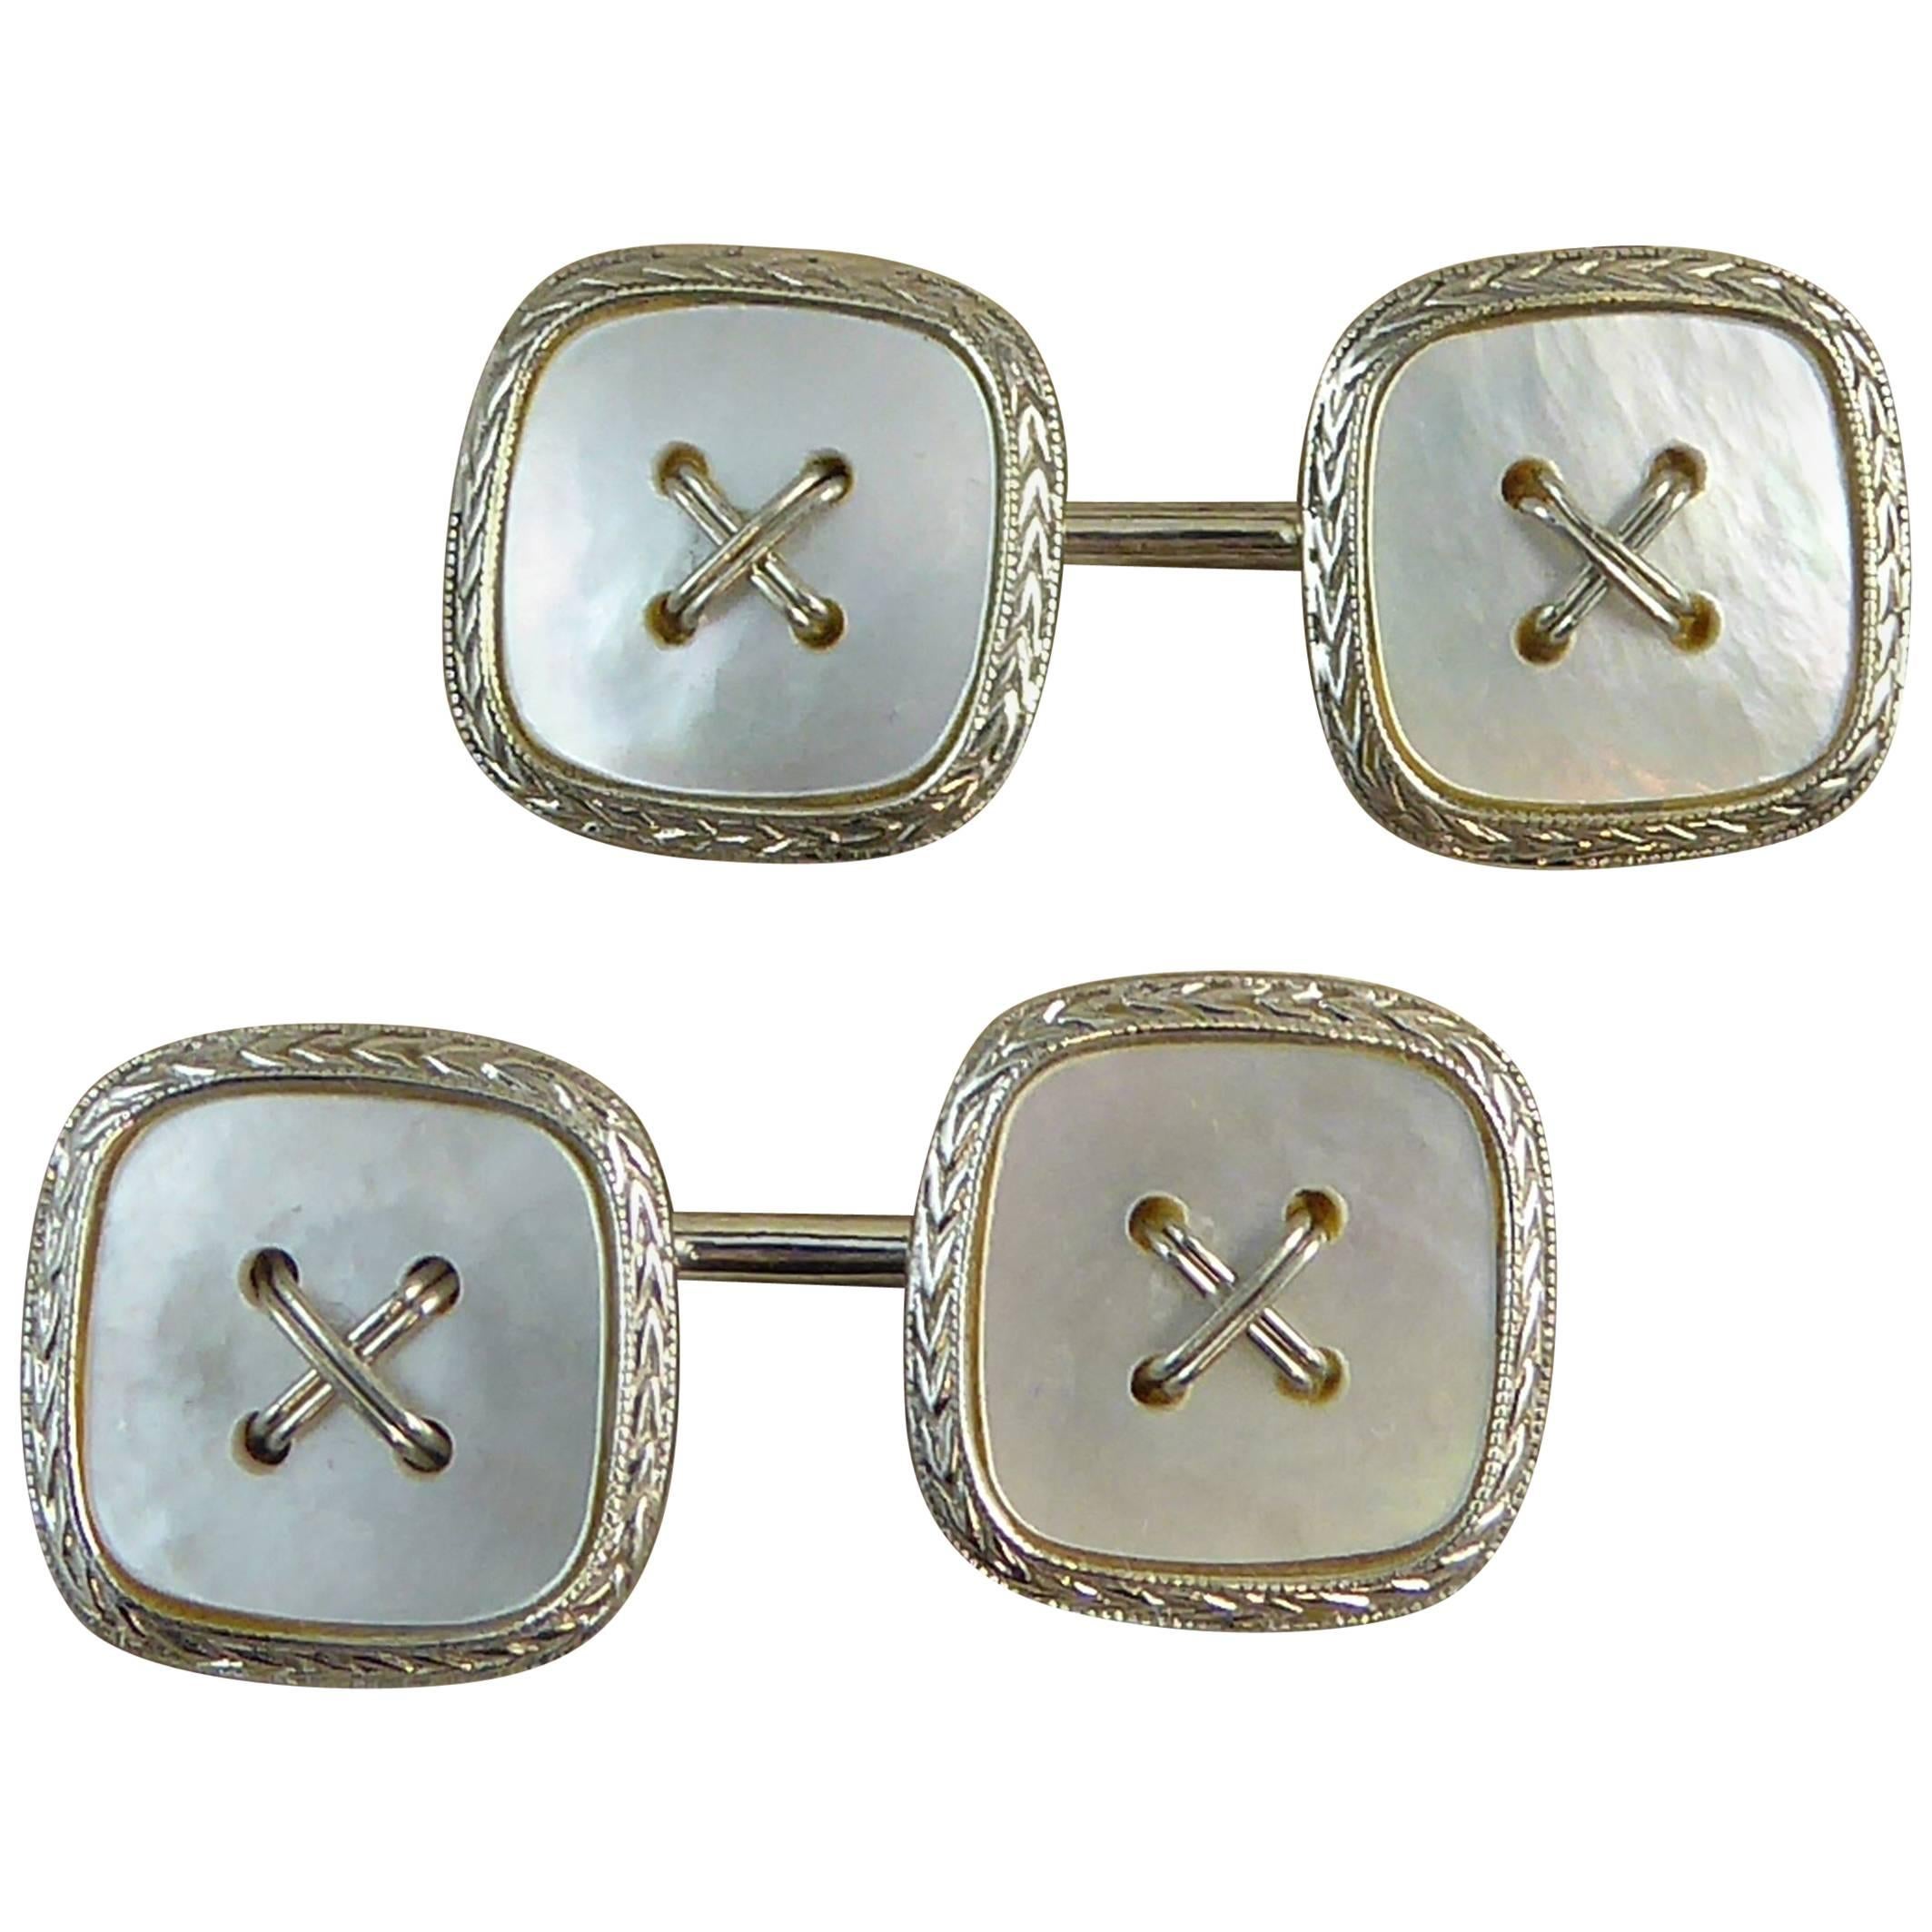 Vintage Art Deco Button Cufflinks, White Gold, Mother-of-Pearl